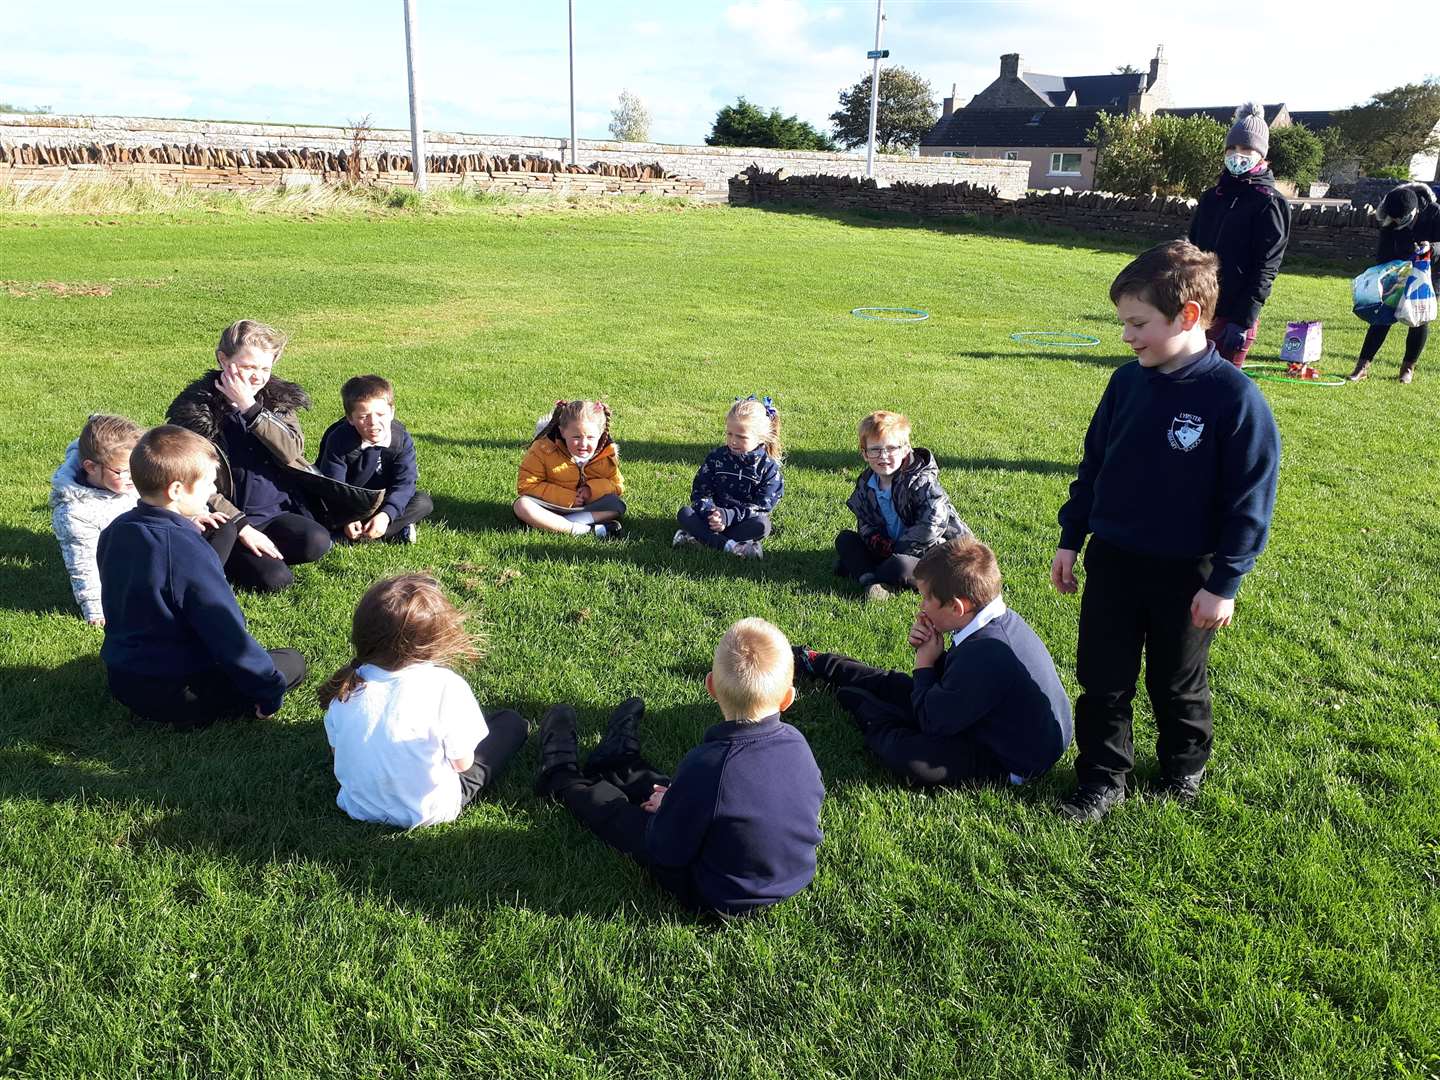 P1-P3 Lybster Youth Club members playing duck, duck, goose – one of the outdoor activities held last September.